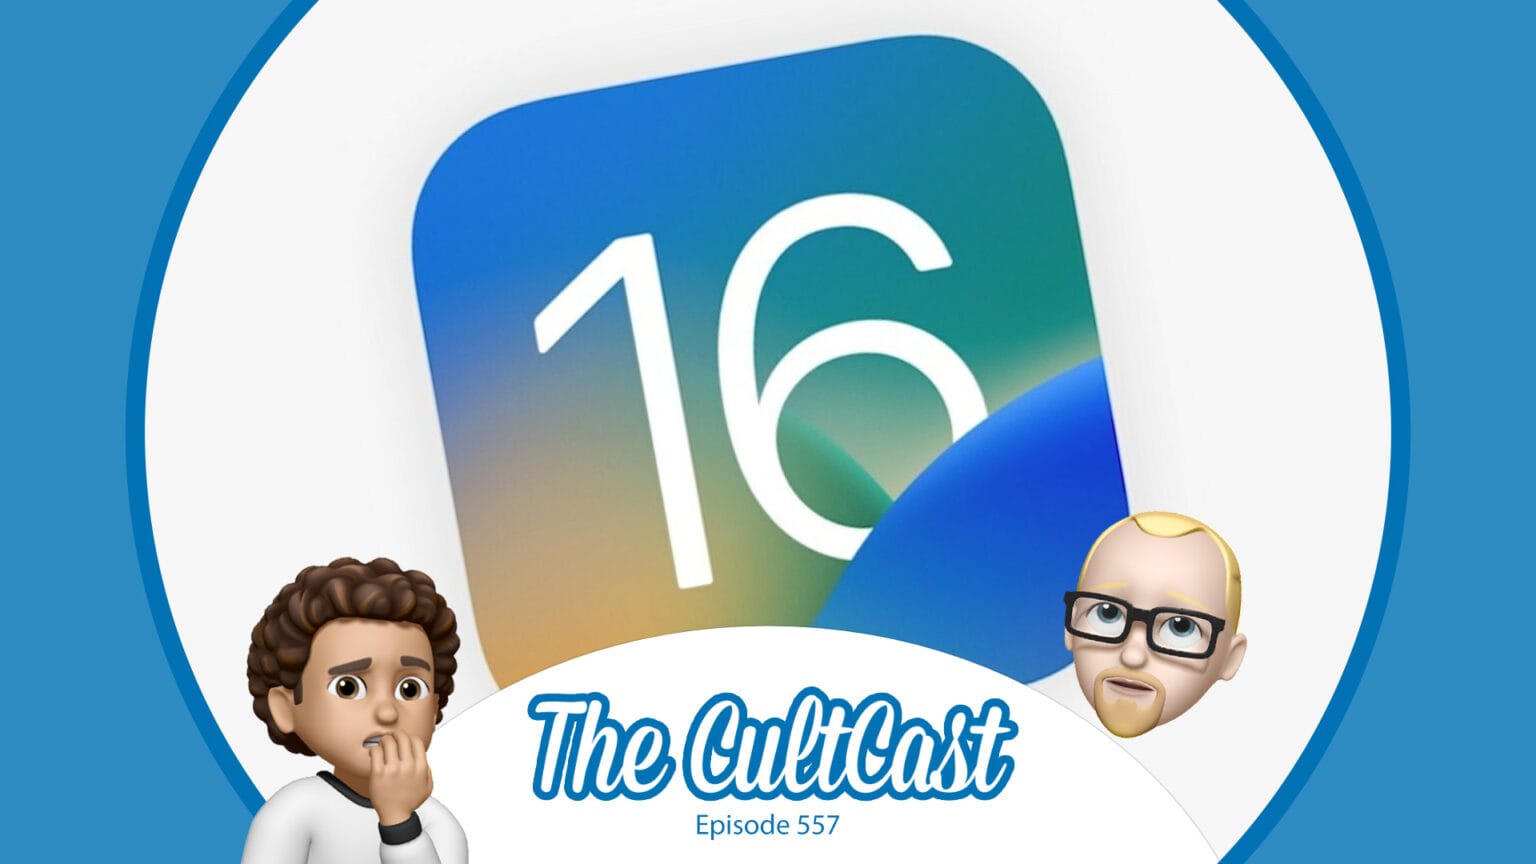 The CultCast podcast: iOS 16 is almost there, but we'll be disappointed if Apple doesn't polish these two things.